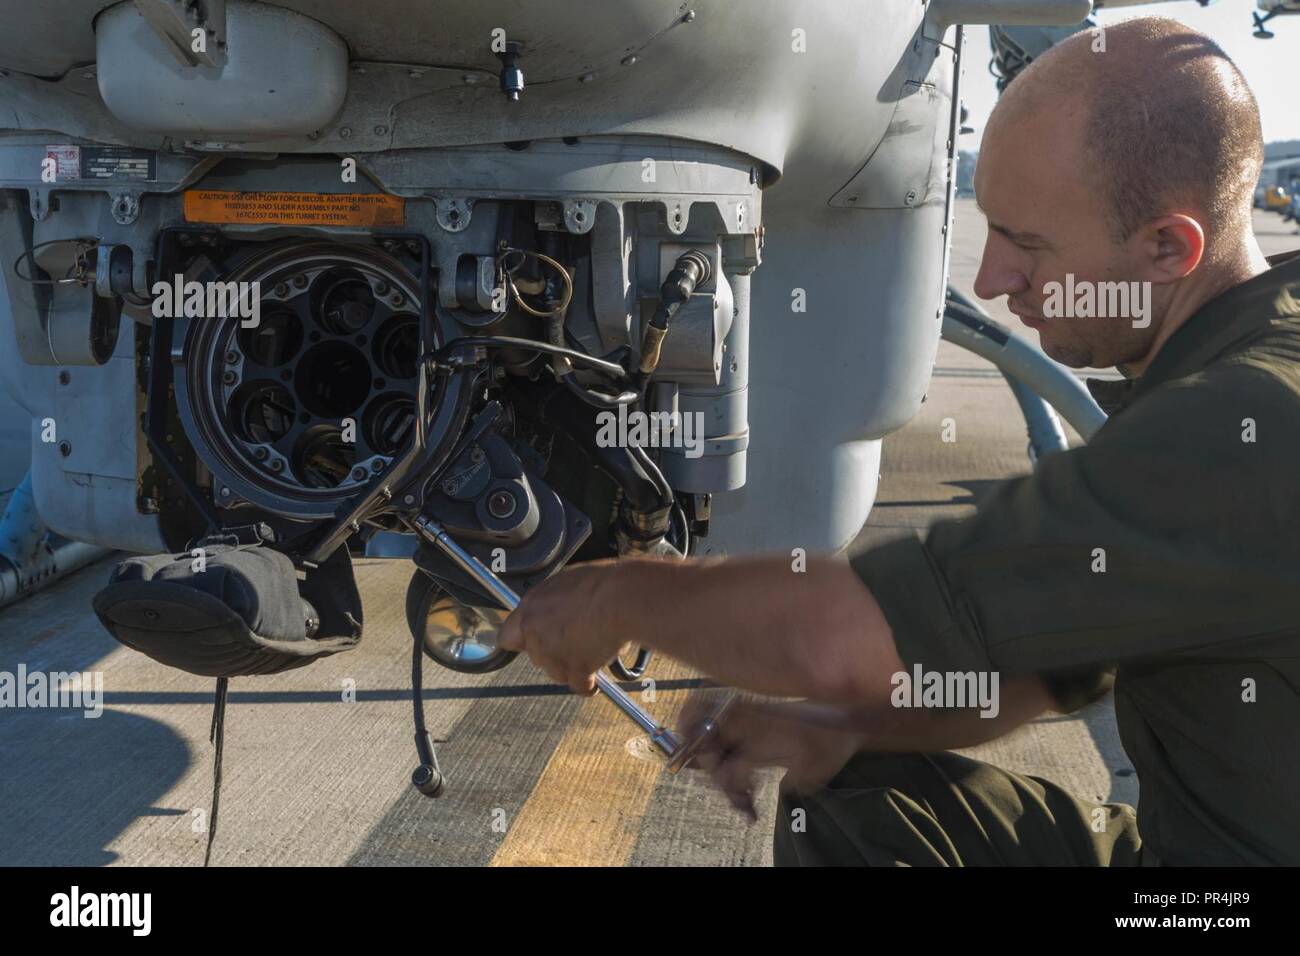 U.S. Marine Corps Lance Cpl. Antony Thompson, ordinance technician, Marine Light Attack Helicopter Squadron 775, 4th Marine Aircraft Wing, unscrews a bolt during an inspection of a M197 turret mounted on a Bell AH-1Z Viper Attack Helicopter at Marine Corps Air Station Camp Pendleton, California, Sept. 14, 2018. Turret inspections are conducted every 56 days. Stock Photo